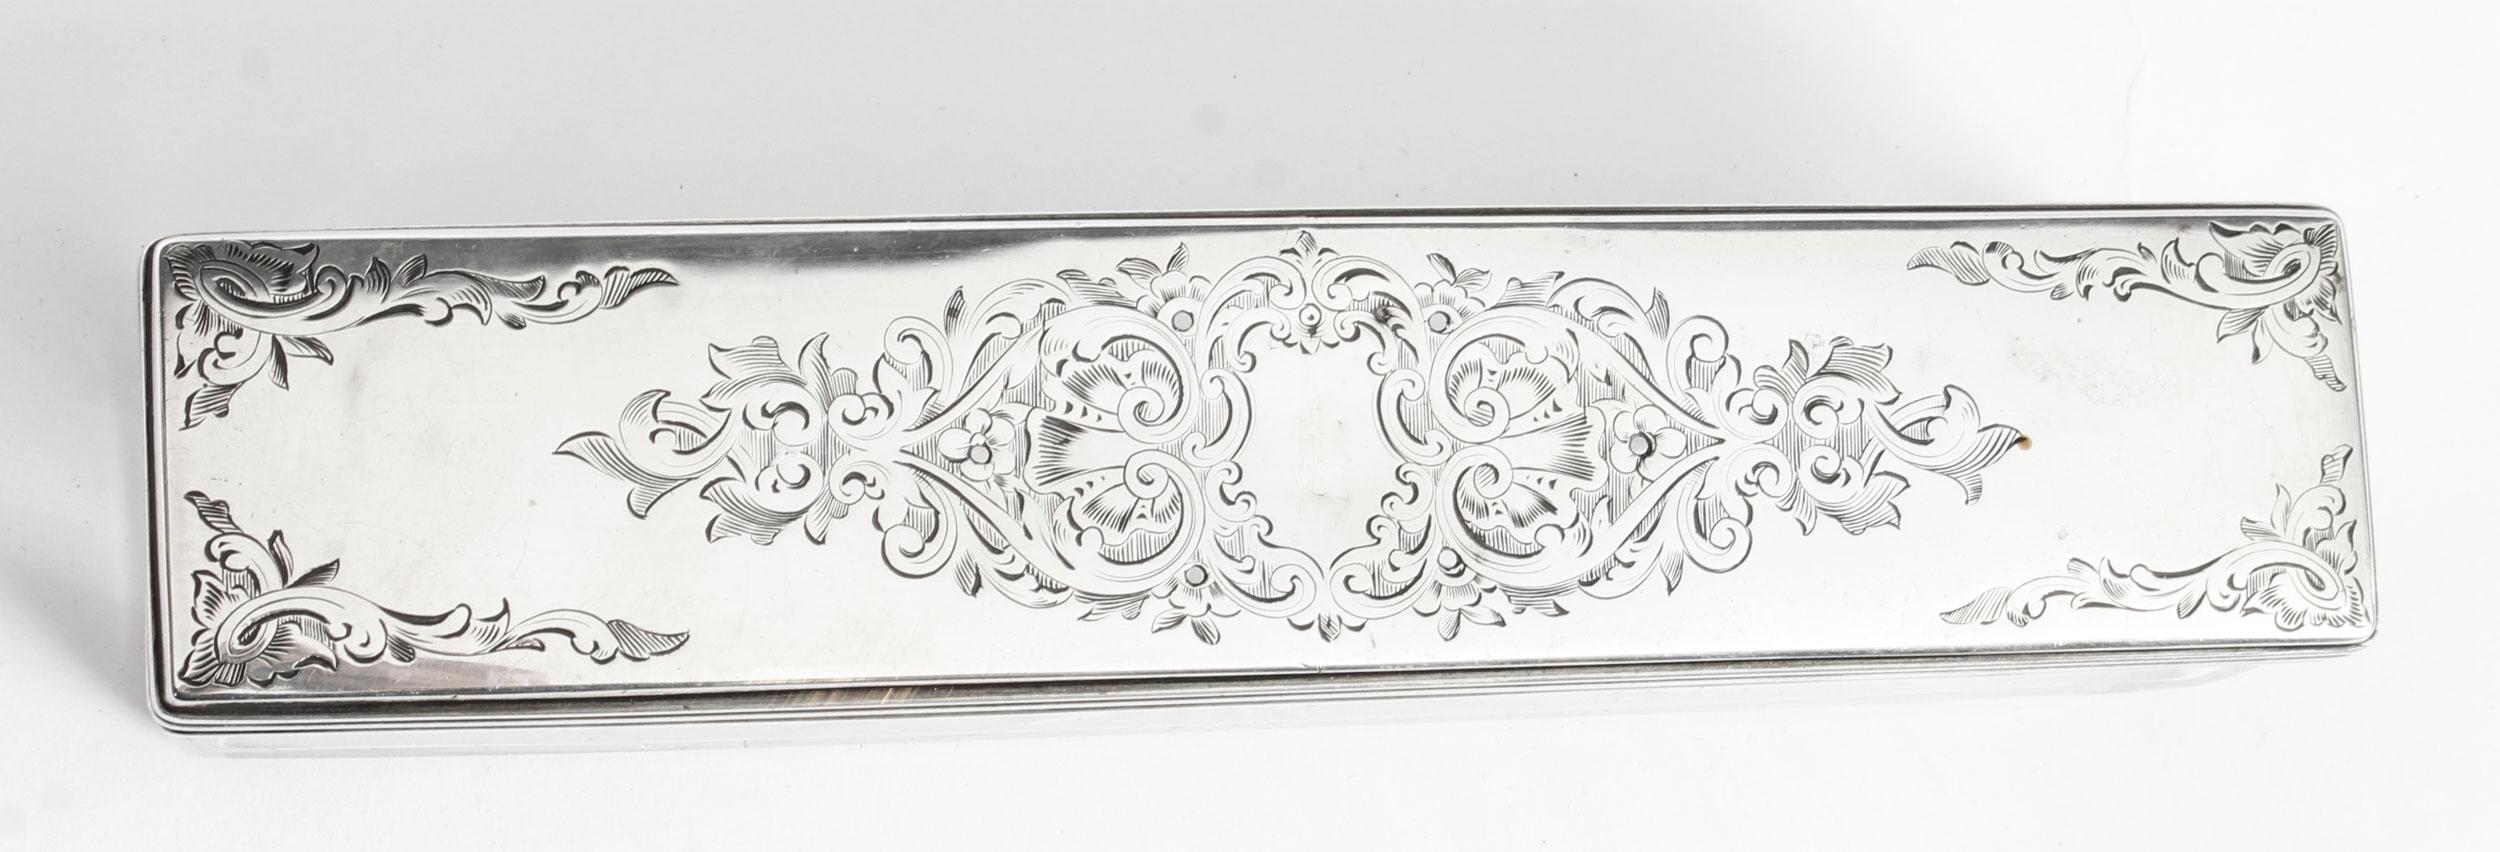 Antique Victorian Sterling Silver Travelling Dressing Case 1861, 19th Century 7